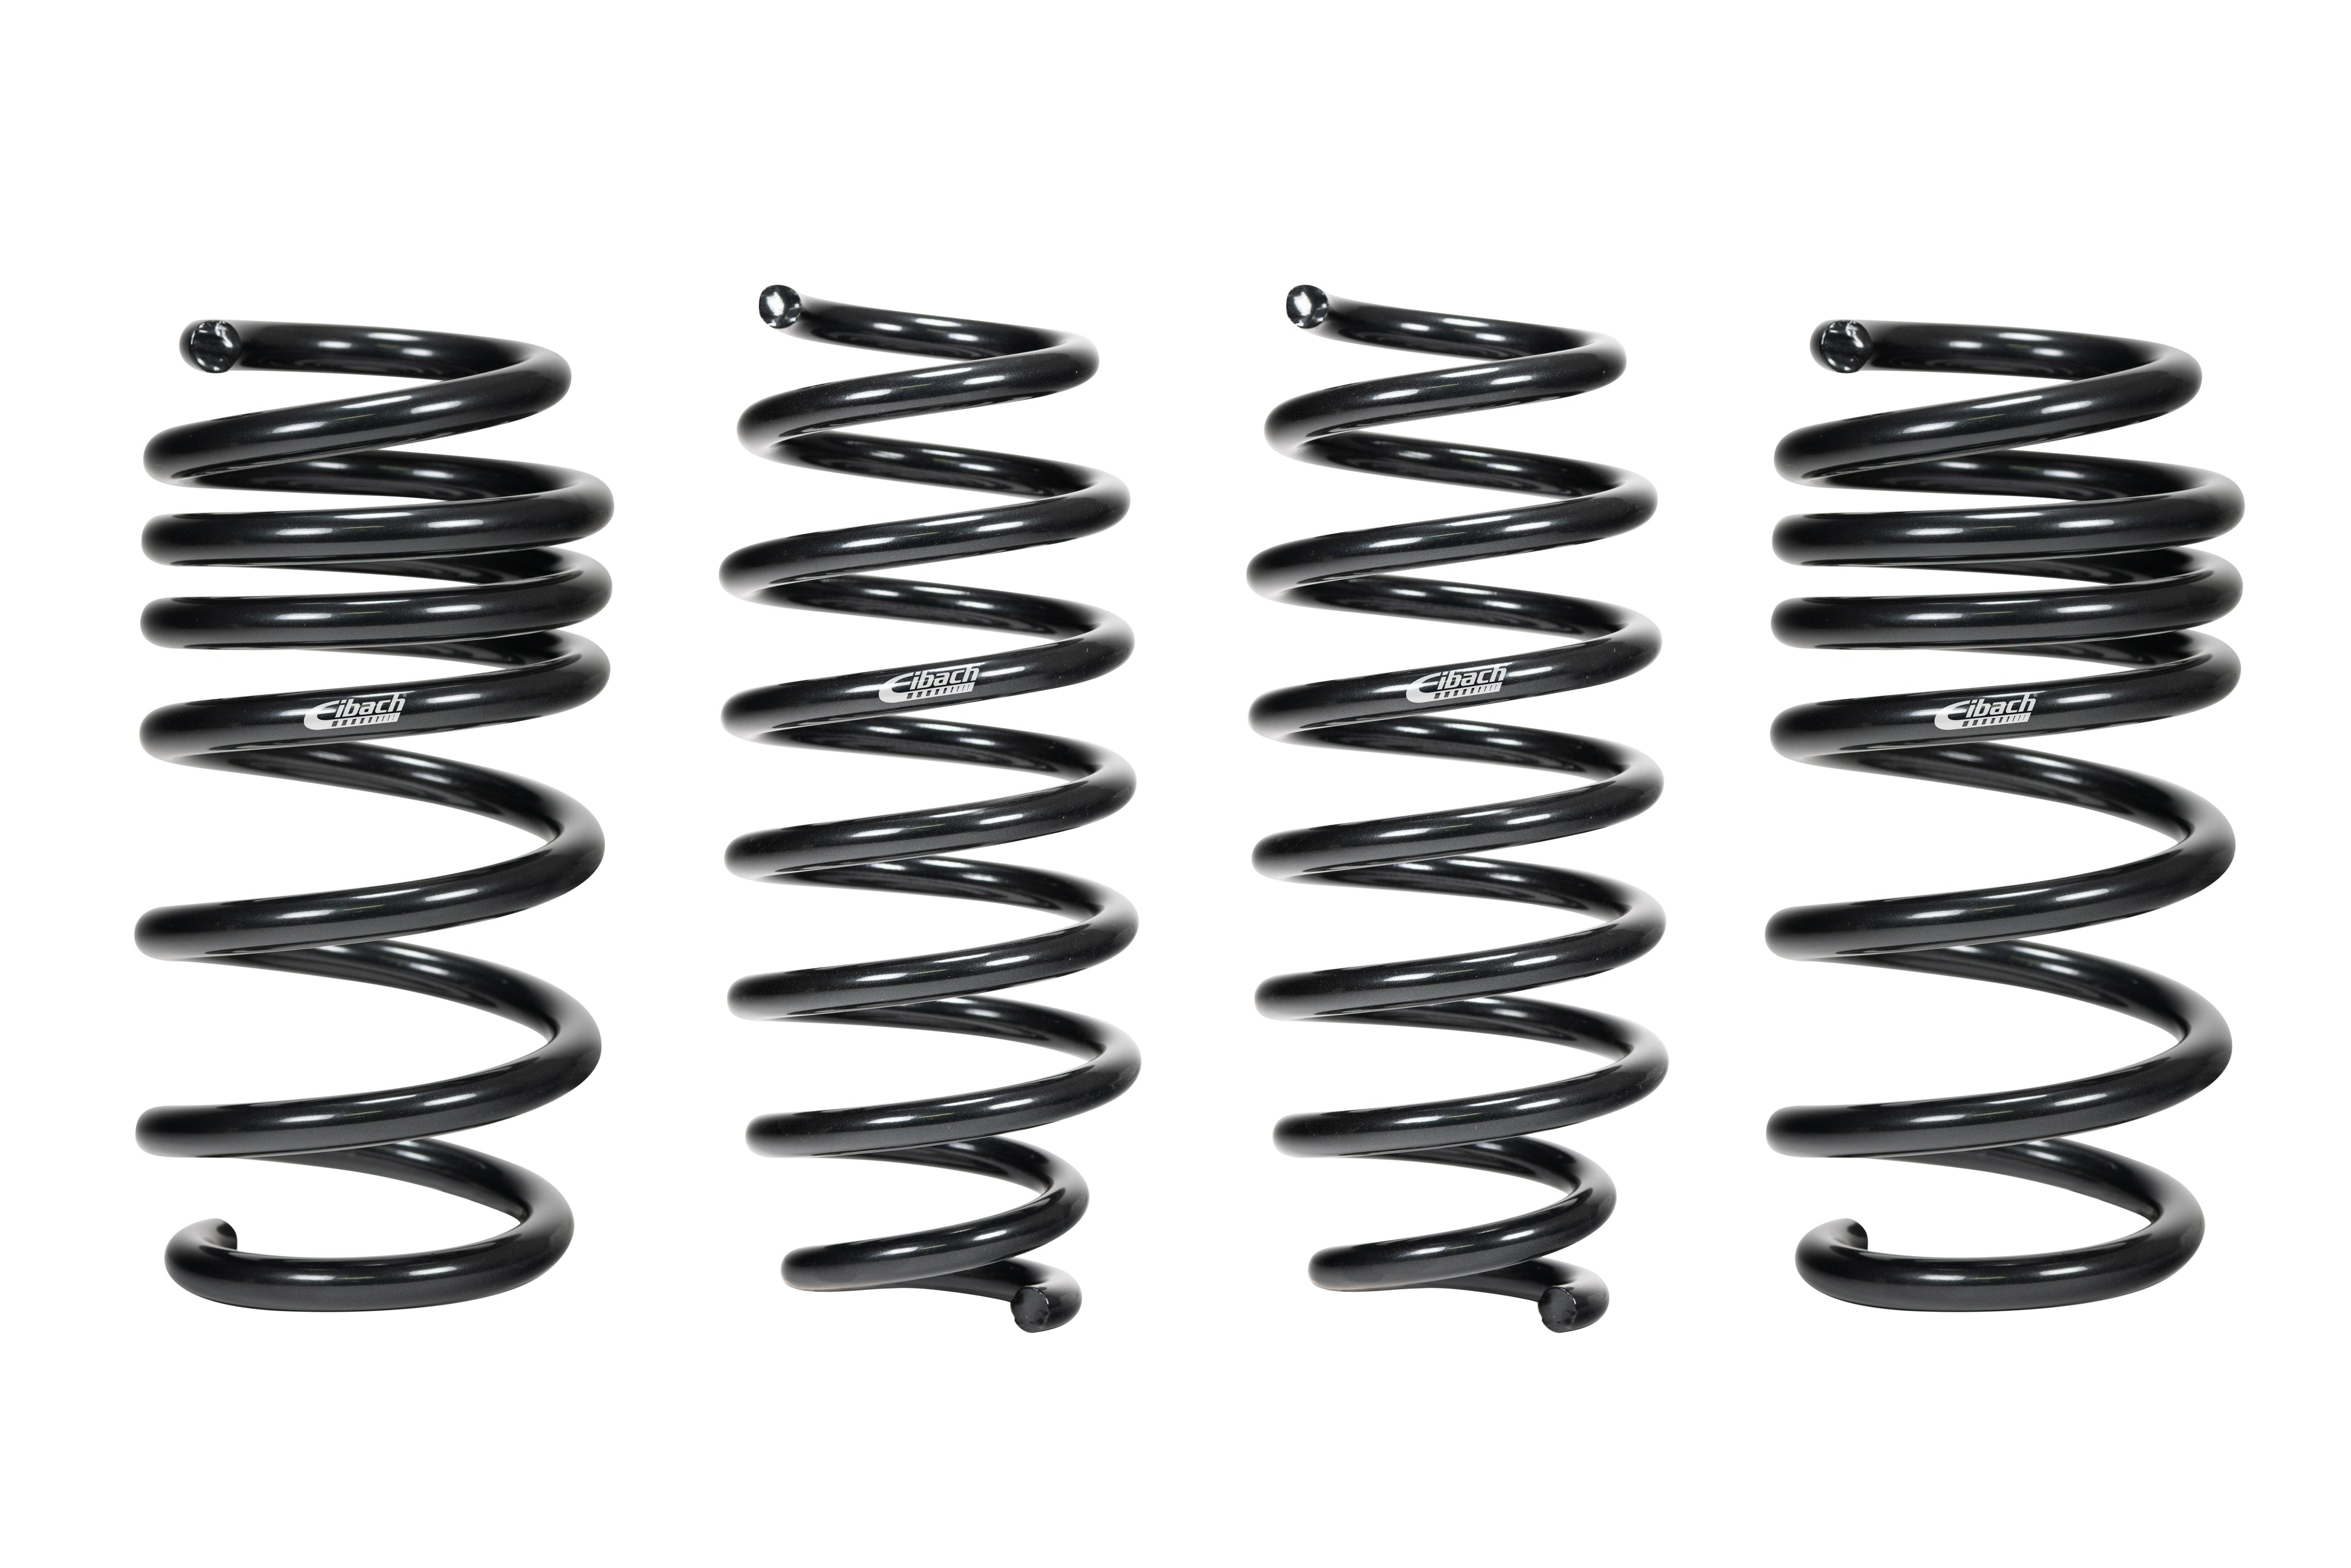 Eibach Suspension Kit Winner: How to Make a Car Handle Better